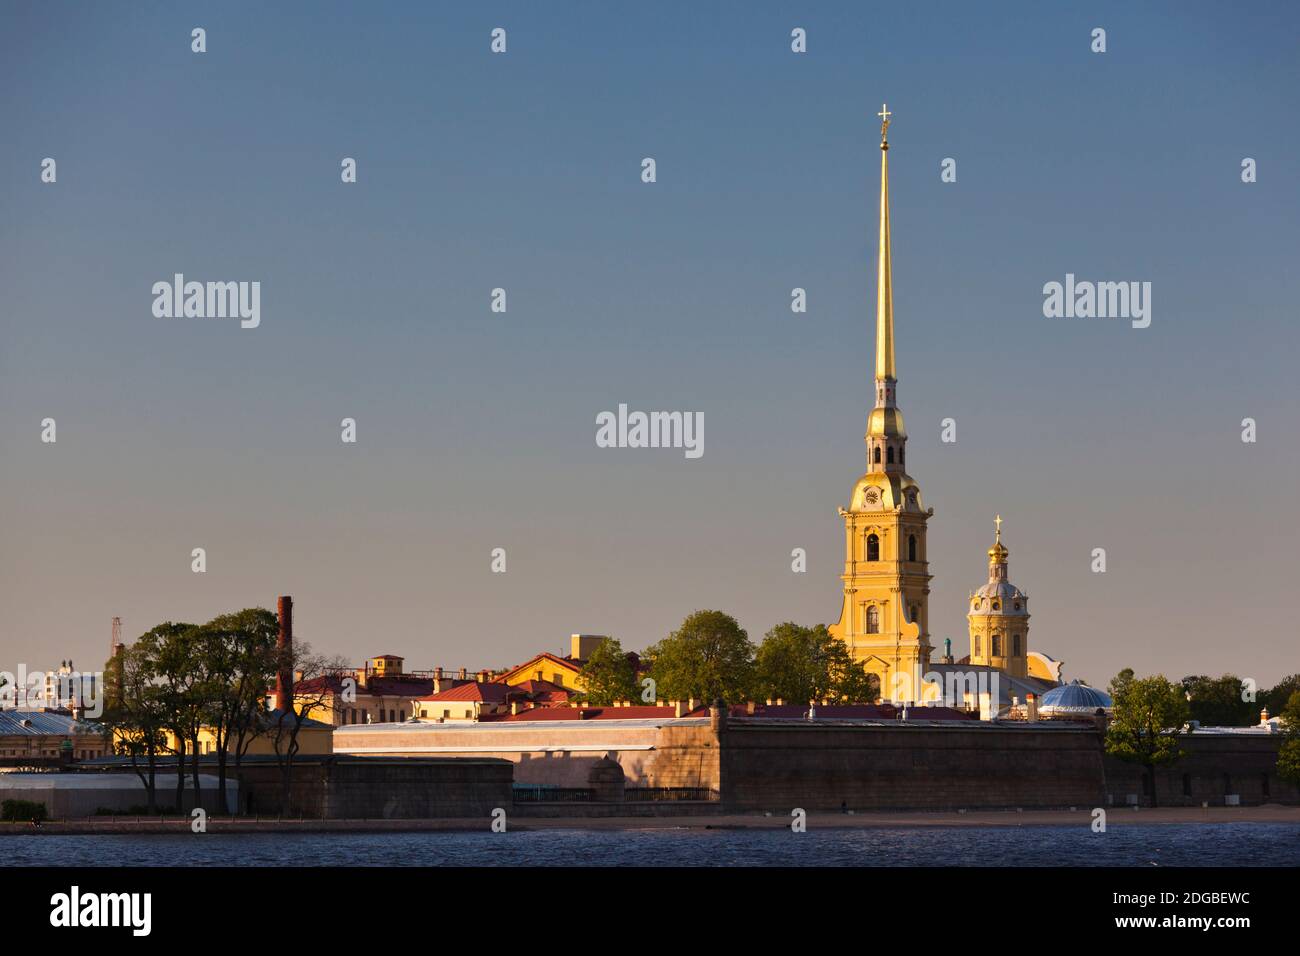 Saints Peter and Paul Cathedral, Peter and Paul Fortress, Neva River, St. Petersburg, Russia Stock Photo